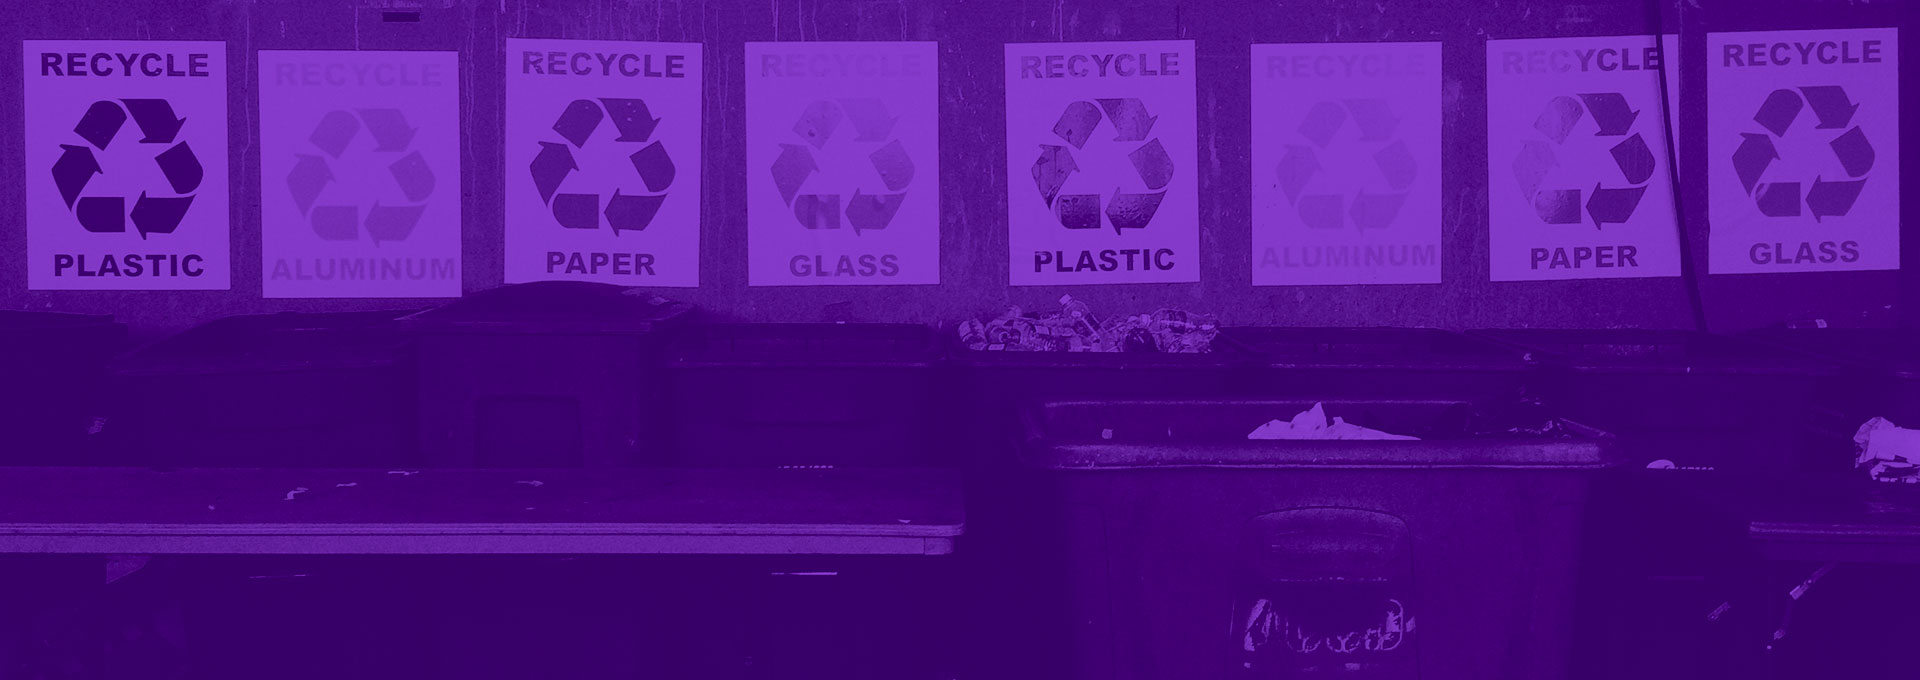 Recycling in the Workplace: Are You Doing It Right?